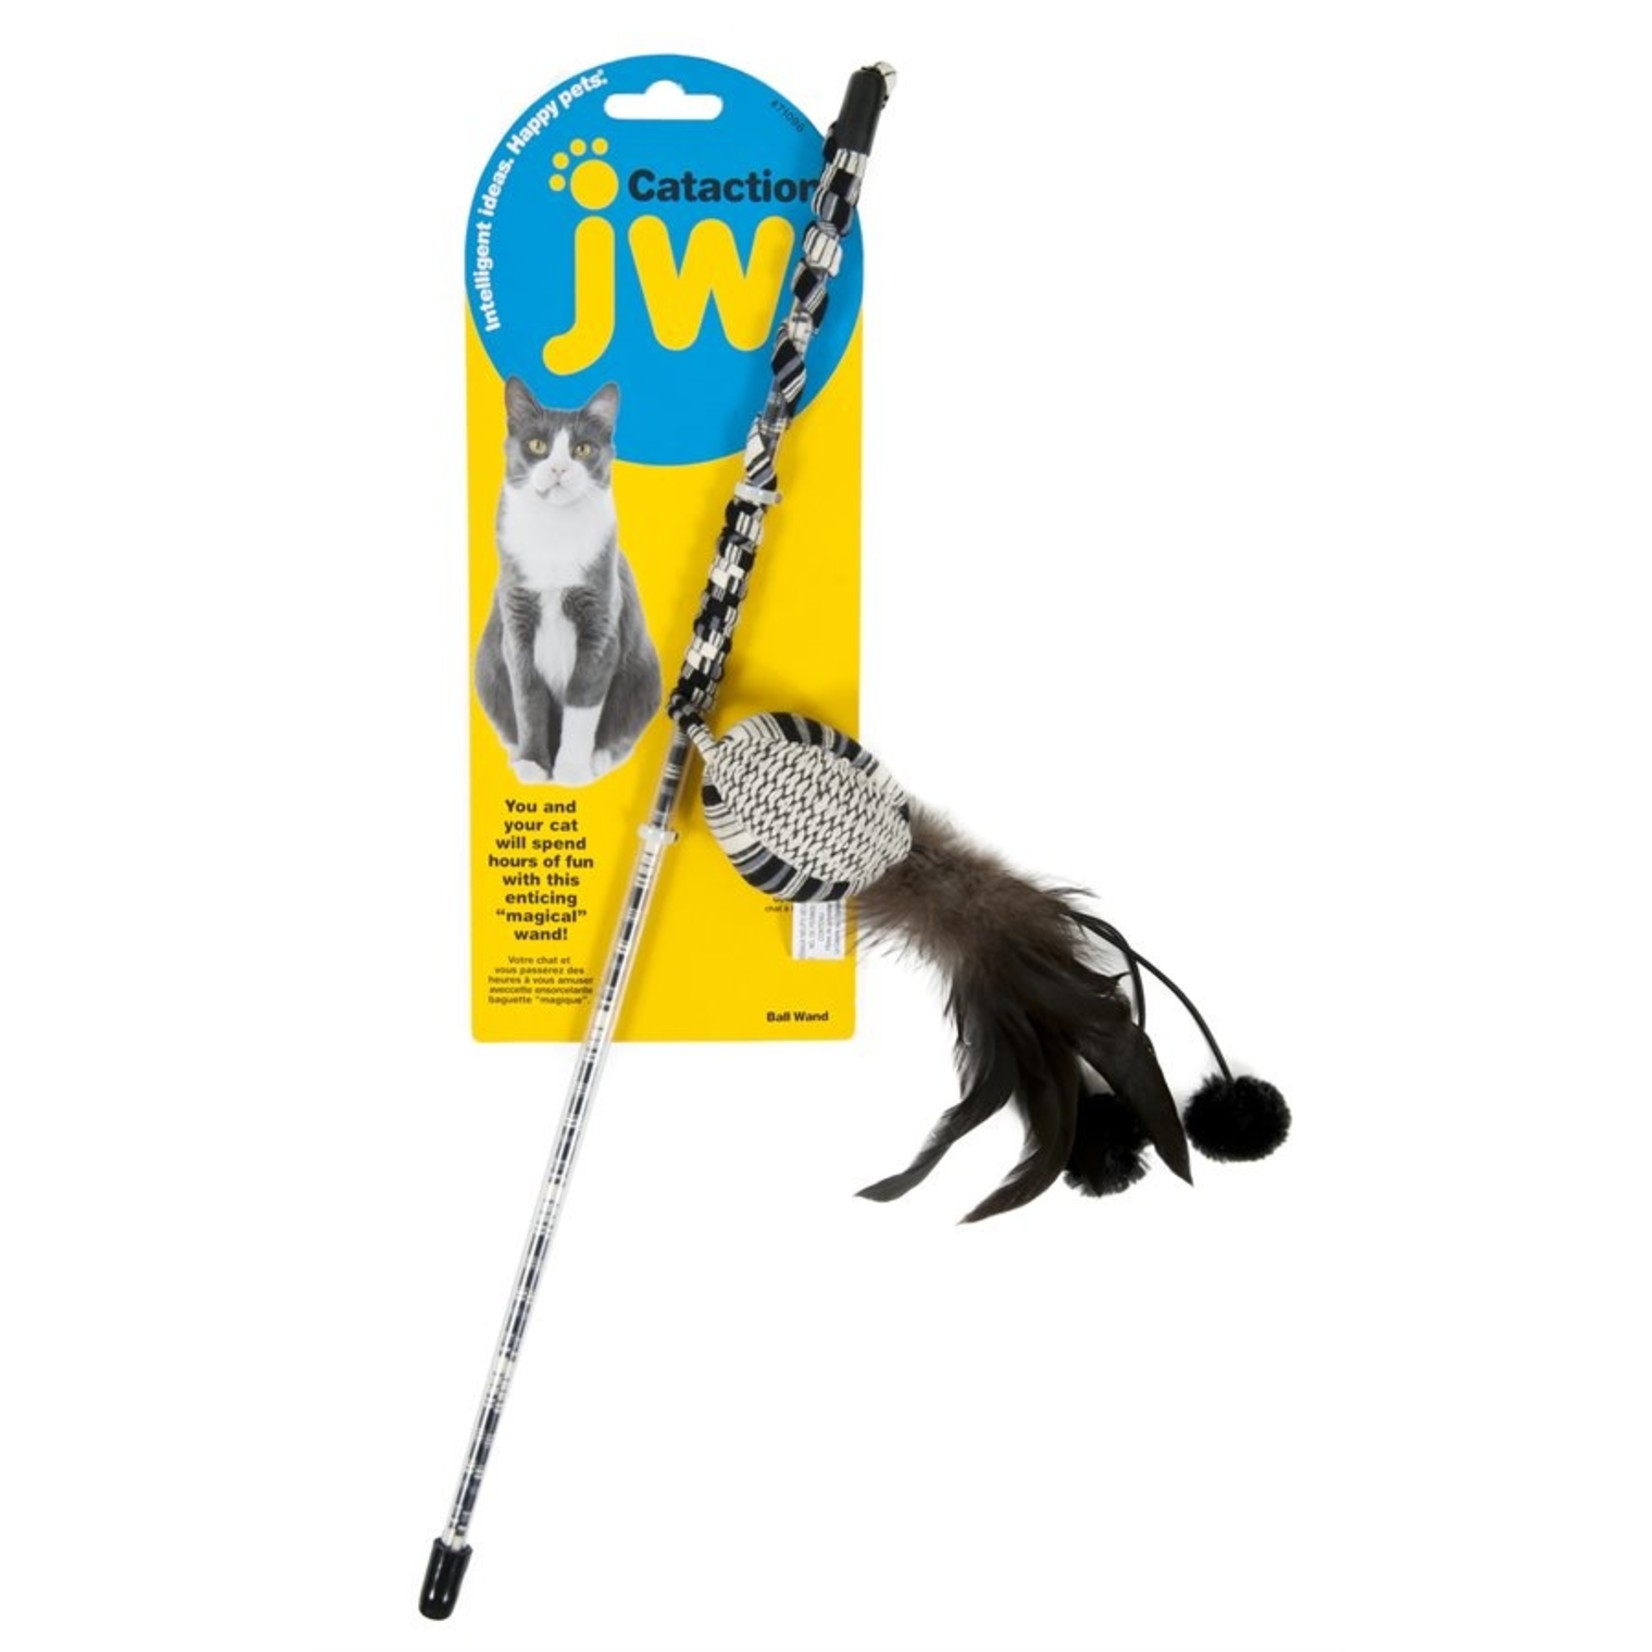 JW JW Cataction Ball with Wand